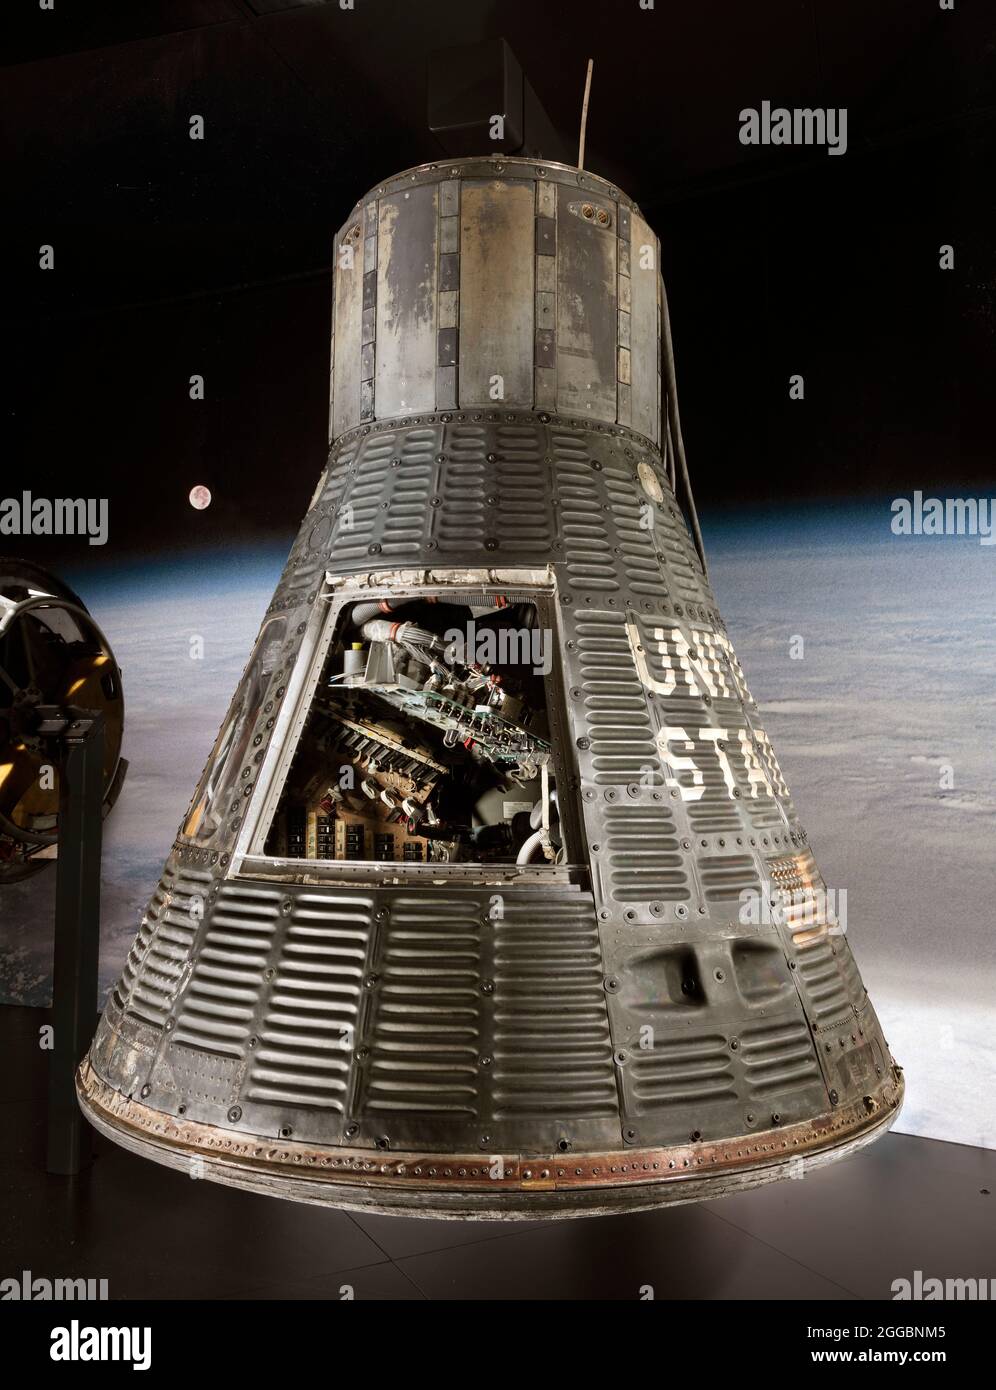 In this historic capsule, John H. Glenn Jr. became the first American to orbit the Earth. Glenn's flight was the third manned mission of Project Mercury, following two suborbital flights by astronauts in 1961. Glenn's three-orbit mission on February 20, 1962, was a sterling success, as he overcame problems with the automatic control system that would have ended an unmanned flight. But reentry was tense, as a faulty telemetry signal from the spacecraft indicated that the heat shield might be loose. Mission Control instructed Glenn not to jettison the retrorocket package after firing in order to Stock Photo